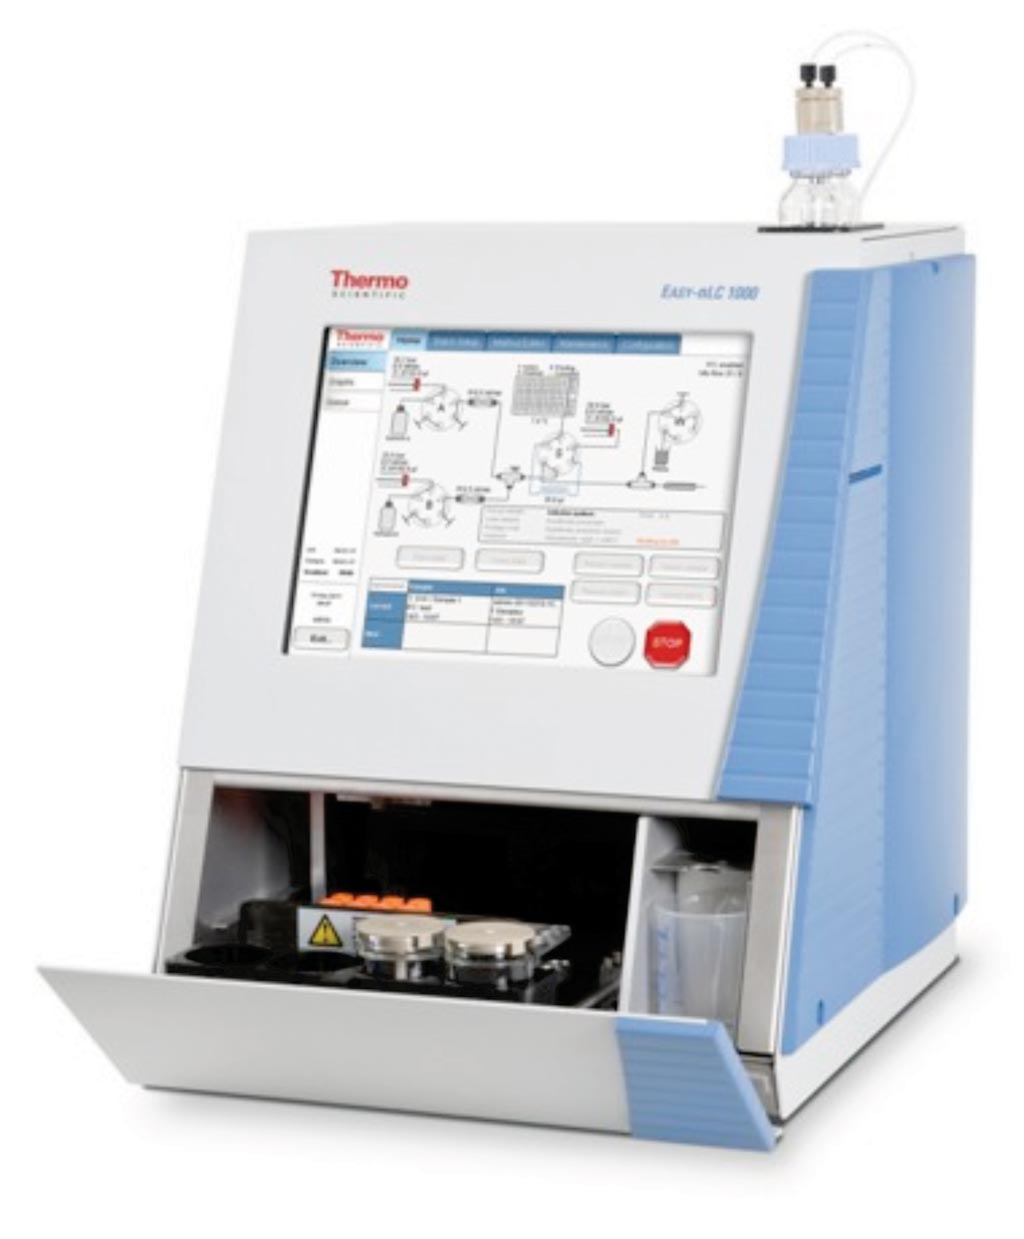 Image: The Easy-nLC 1000 liquid chromatography system (Photo courtesy of Thermo Fisher Scientific).